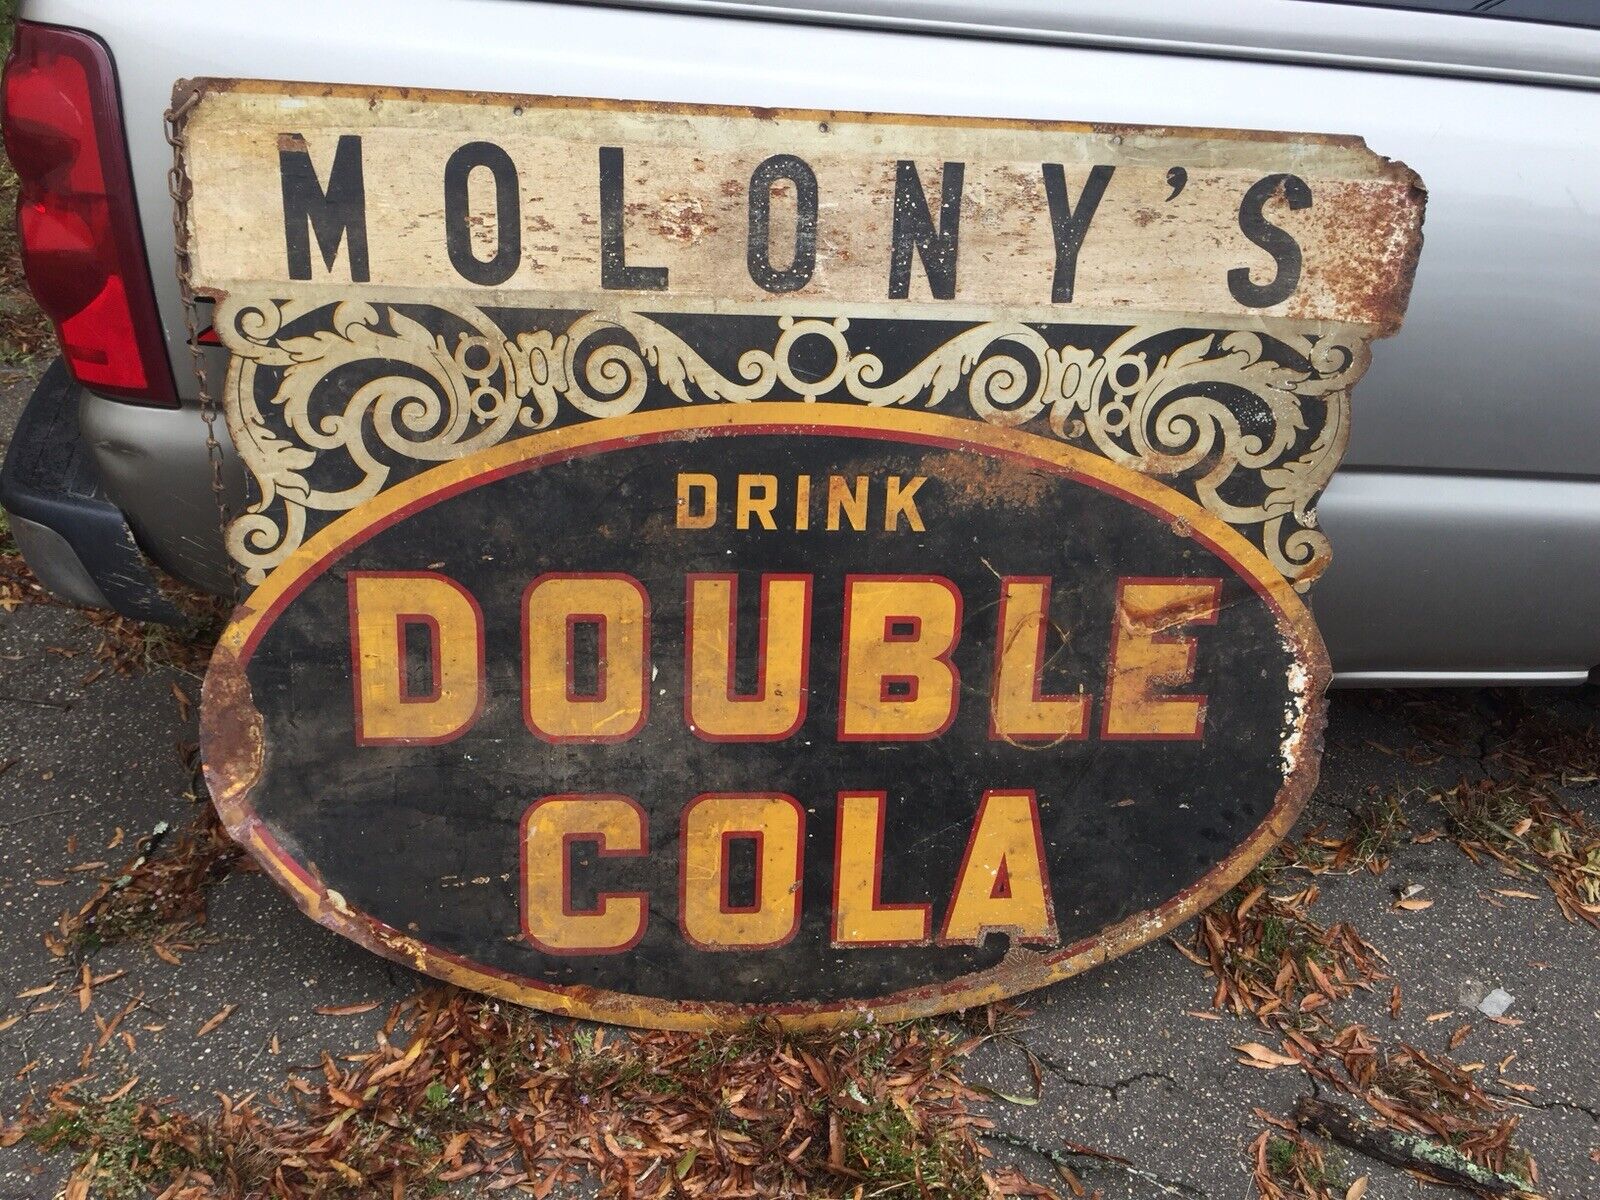 1930s Original 2-Sided Die-Cut Filigree DOUBLE COLA Metal Sign MOLONYS Canton MS